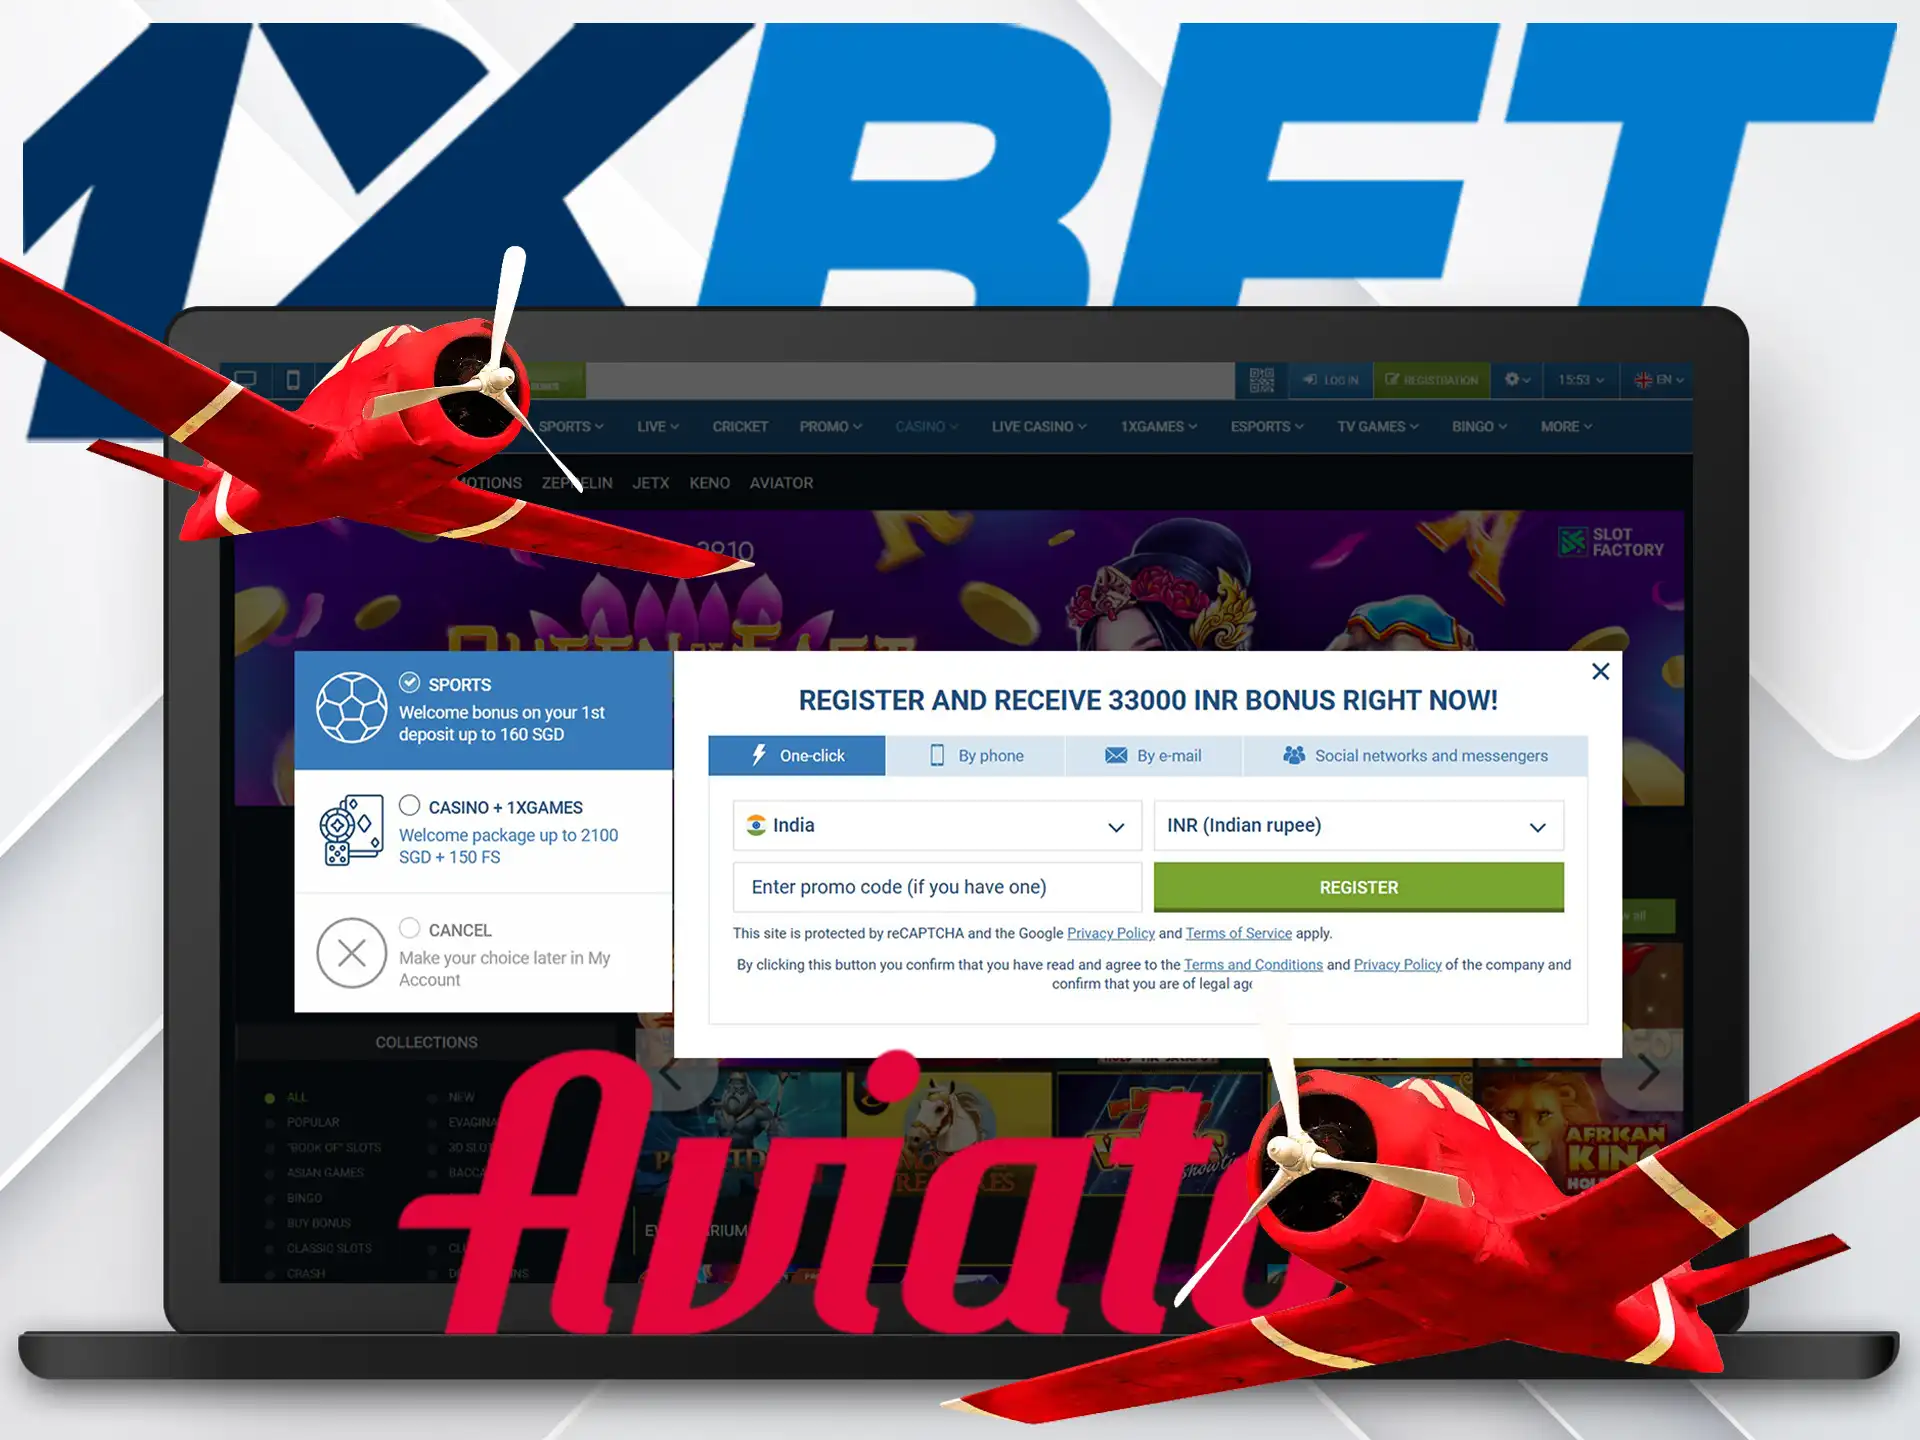 To start playing the Aviator game go through the registration procedure on the 1xbet website.